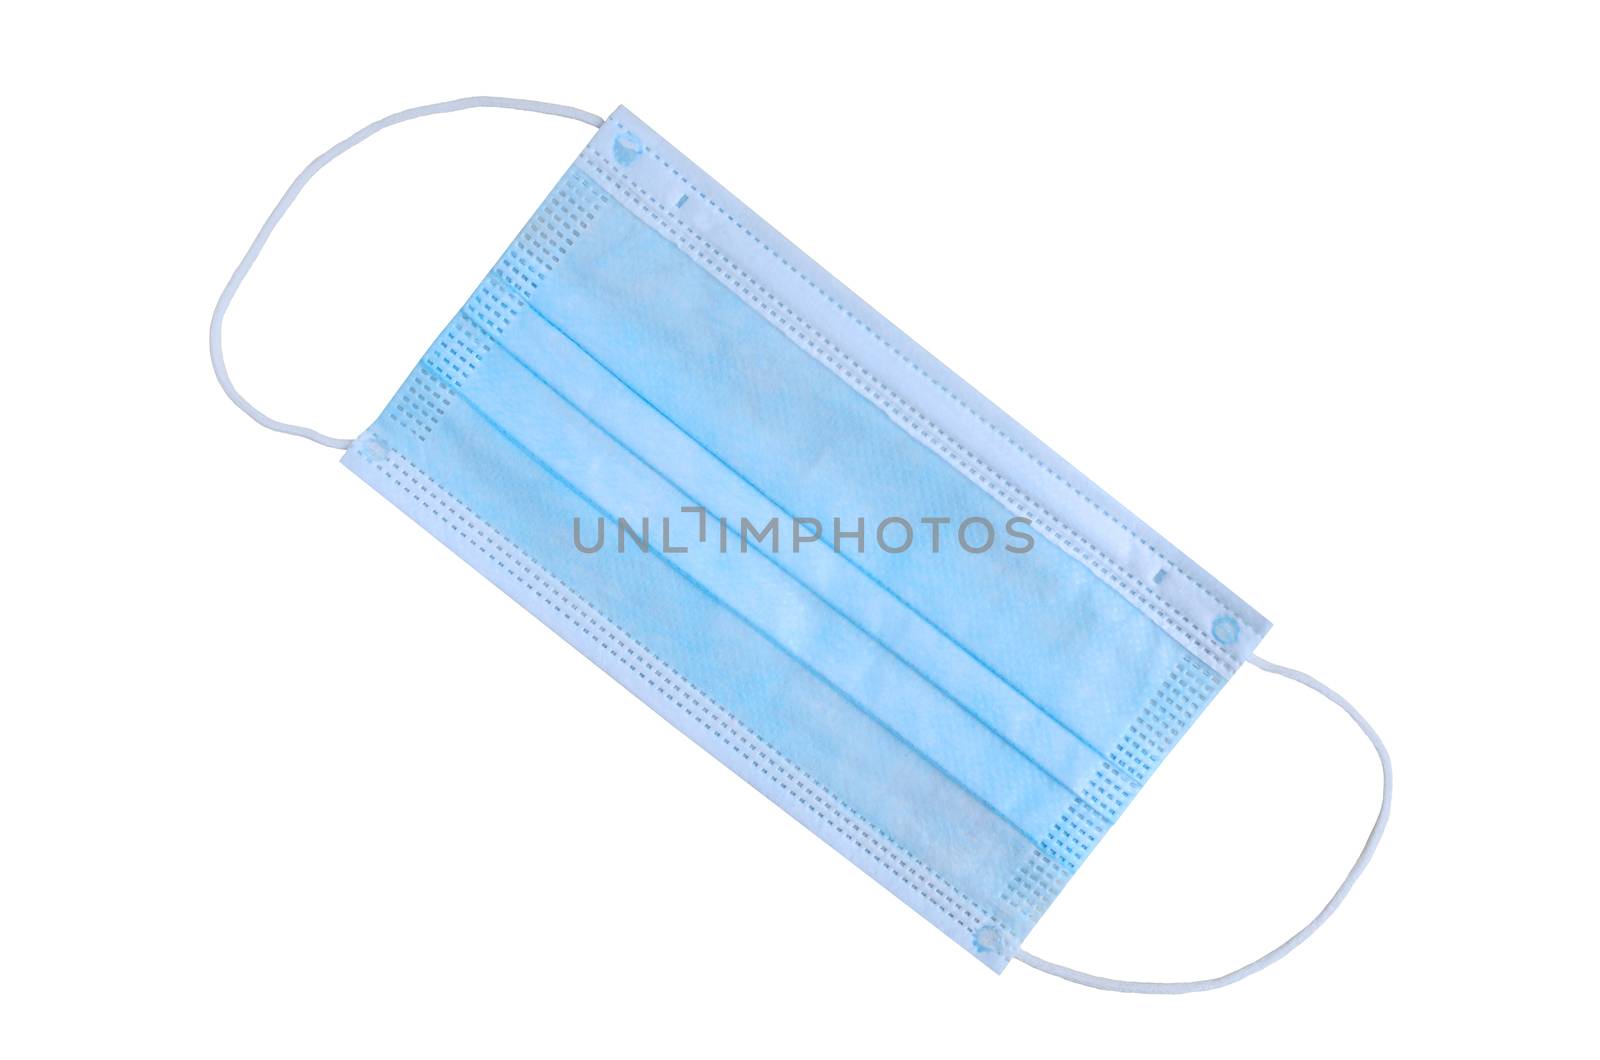 Surgical mask with rubber ear straps isolated on white background. Typical 3-ply surgical mask to cover the mouth and nose. Protection concept.